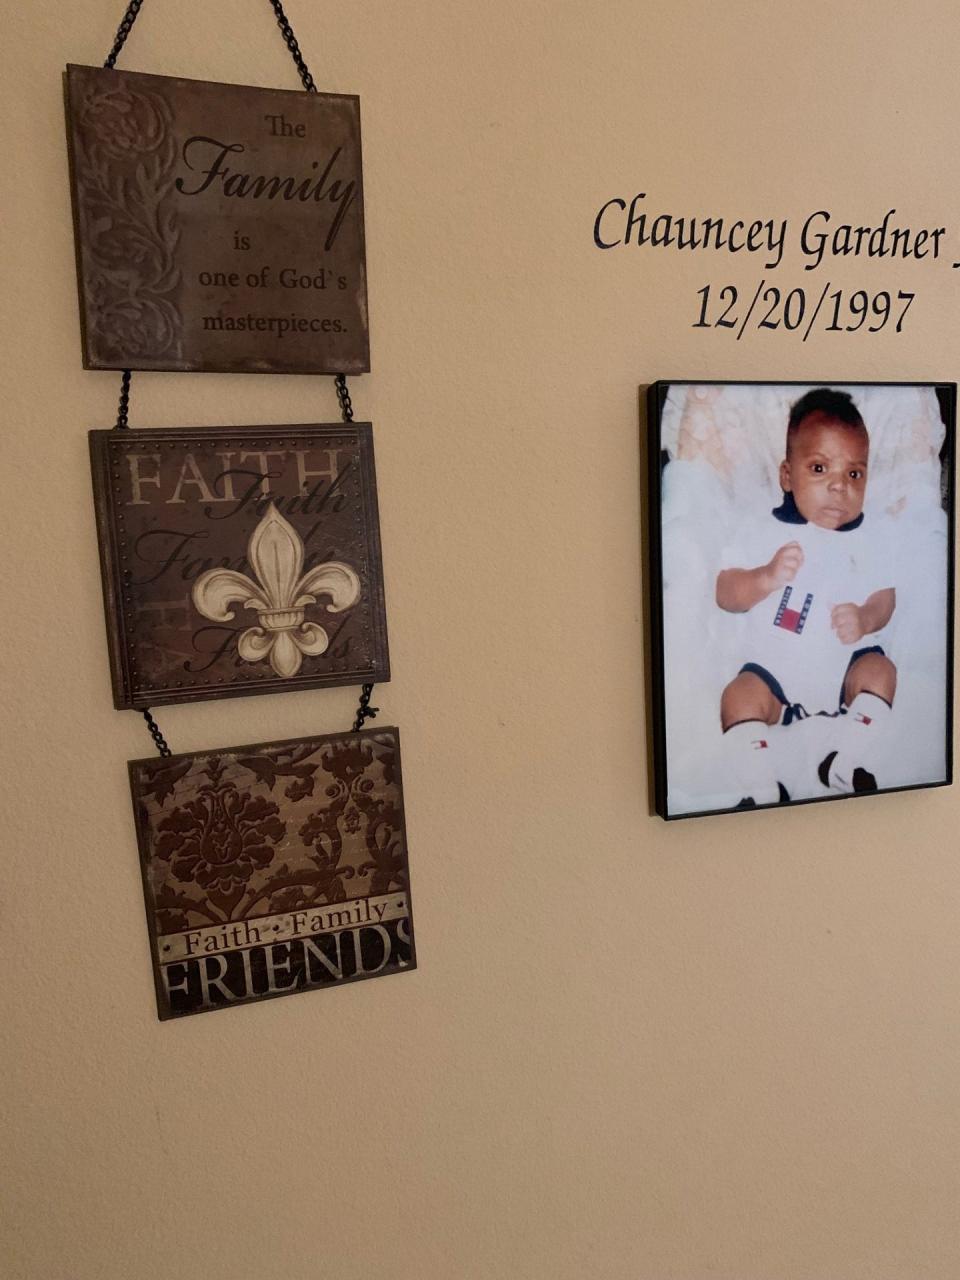 A photo of C.J. Gardner-Johnson when he was a baby next to a wall display.